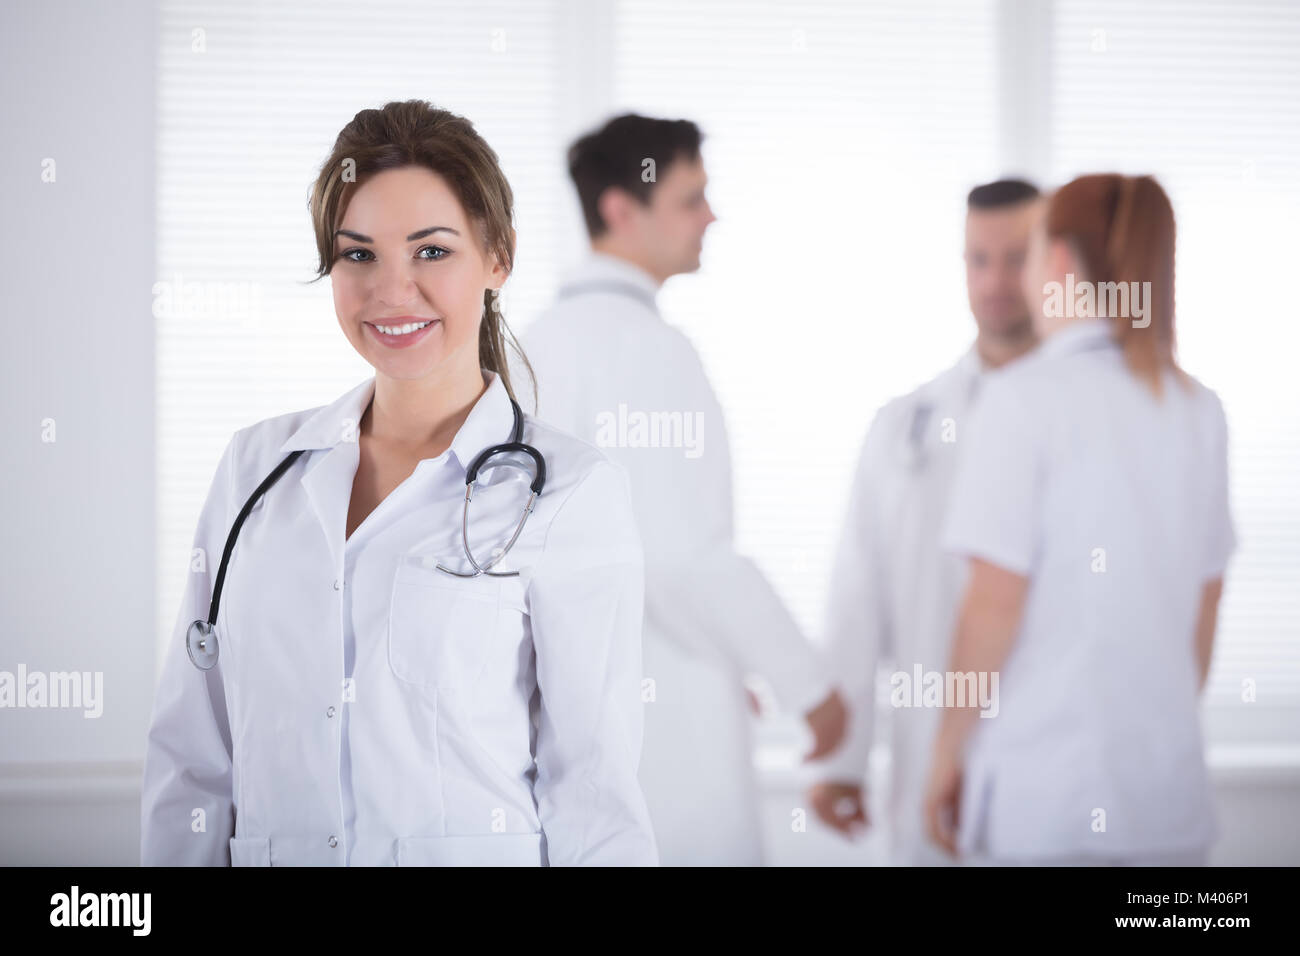 Portrait of Young Smiling Professional Female Doctor with Stethoscope Banque D'Images